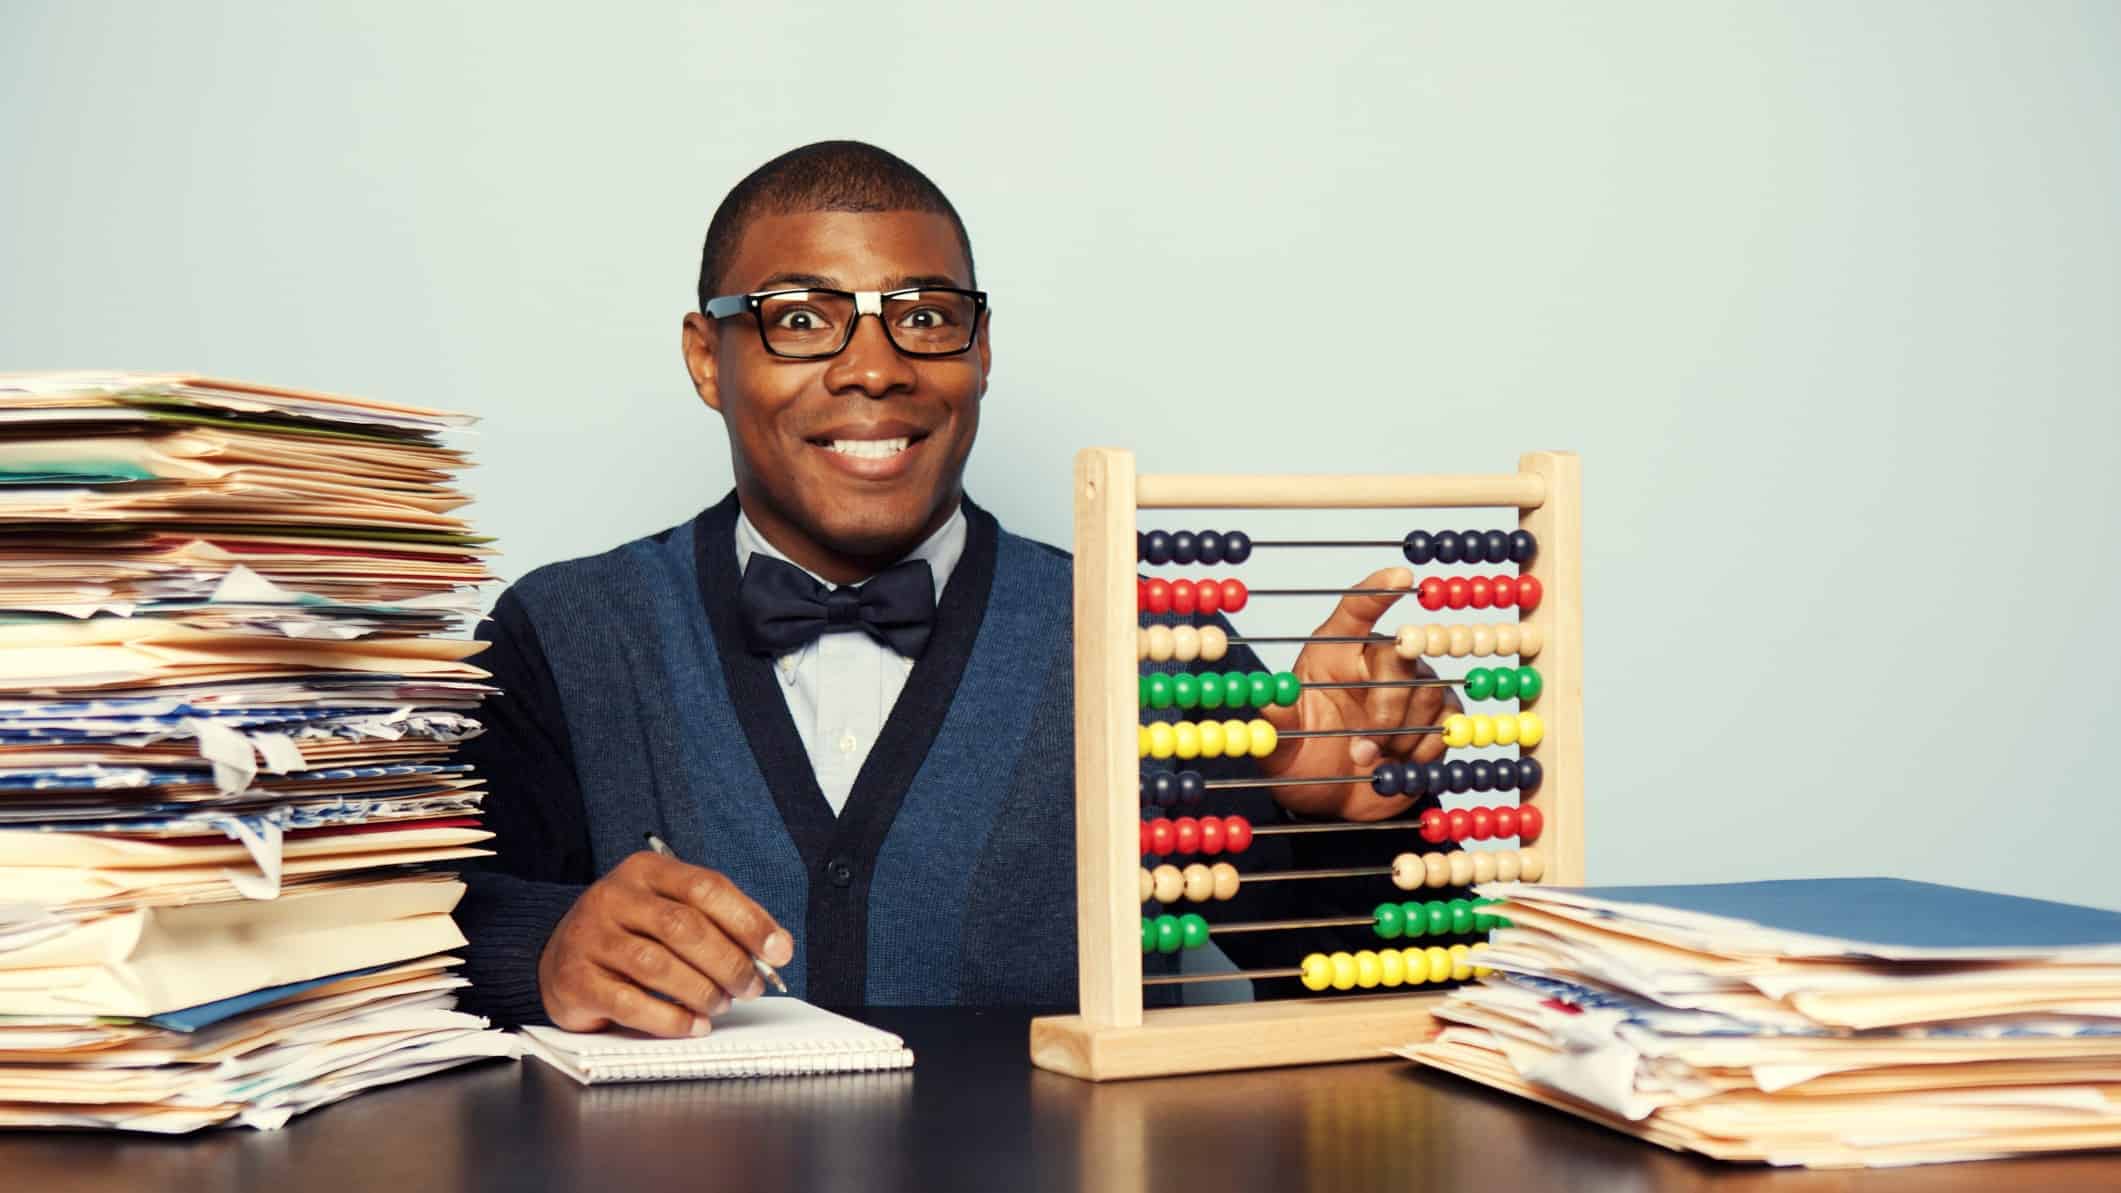 An accountant gleefully makes corrections and calculations on his abacus with a pile of papers next to him.